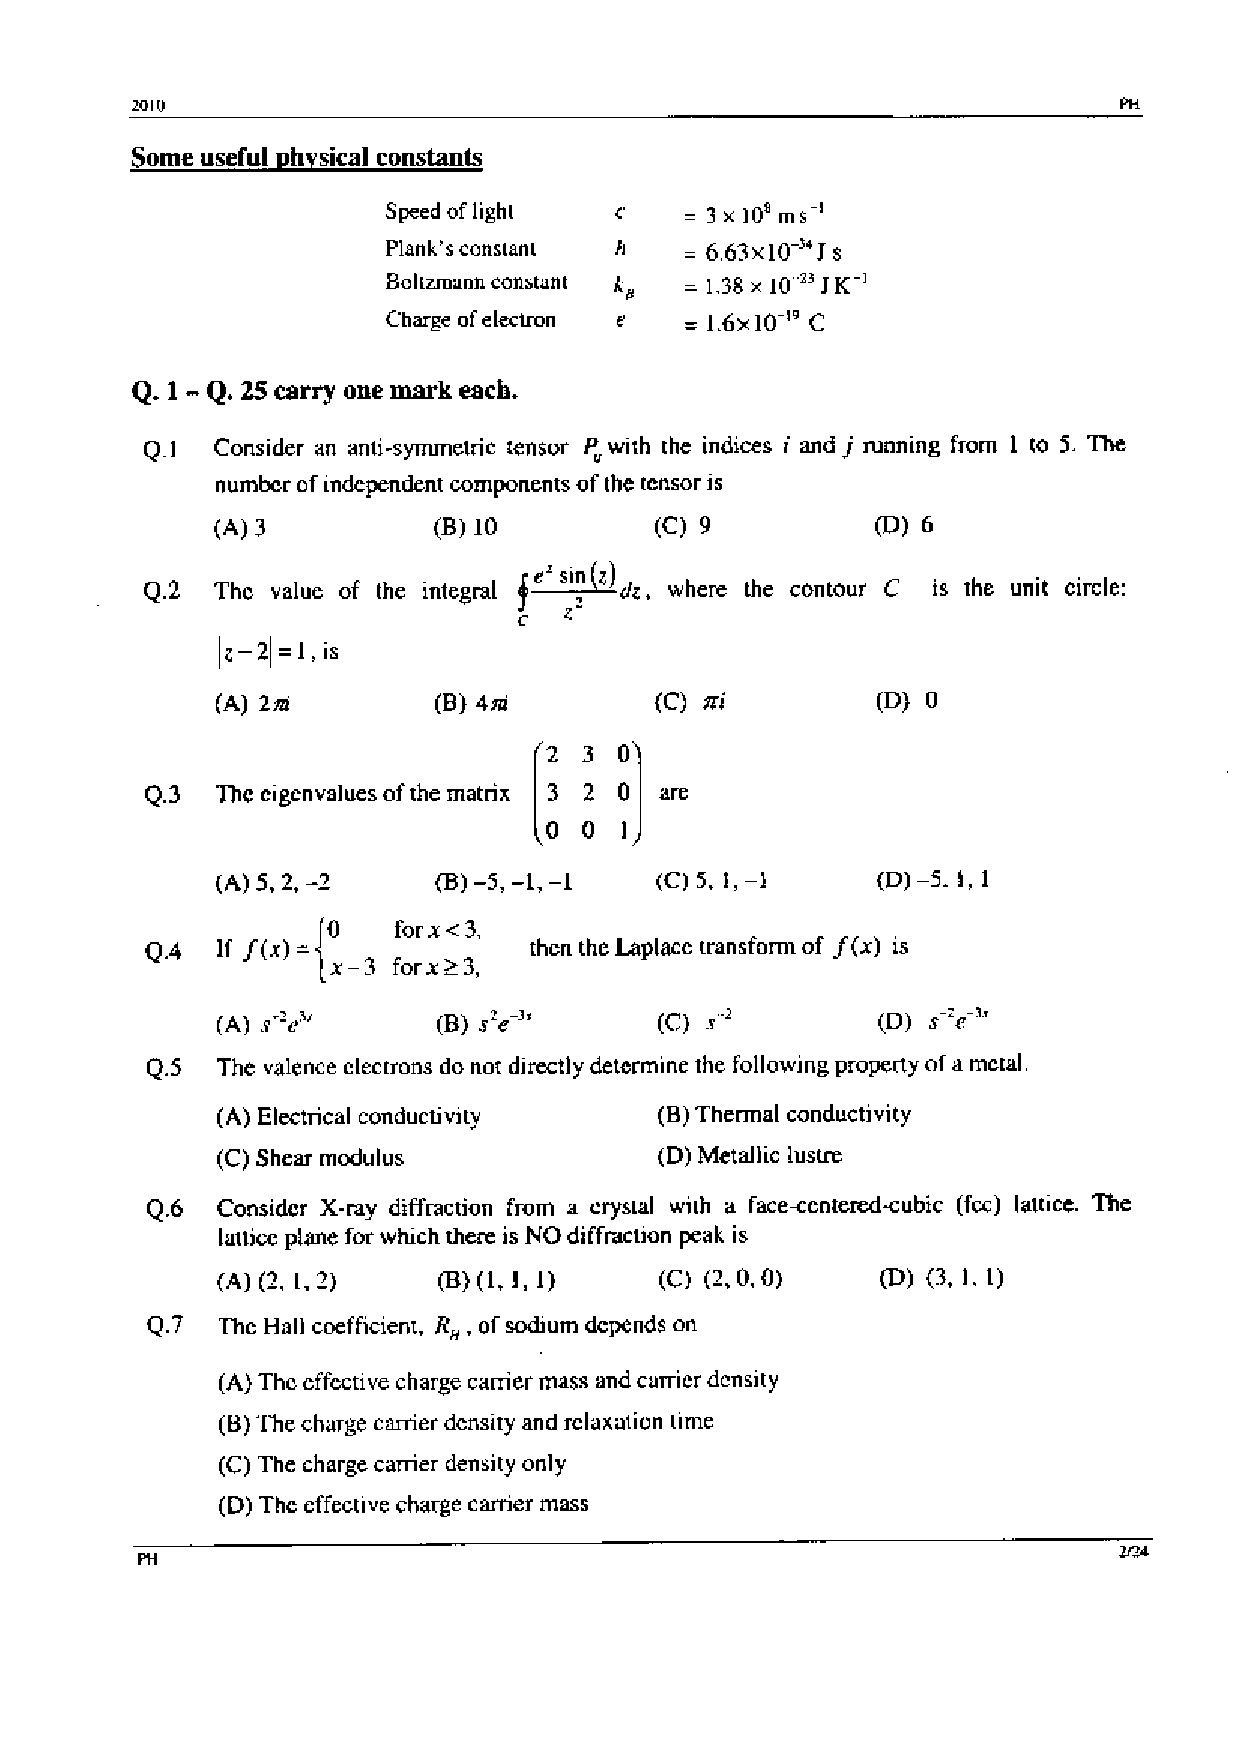 GATE Exam Question Paper 2010 Physics 2